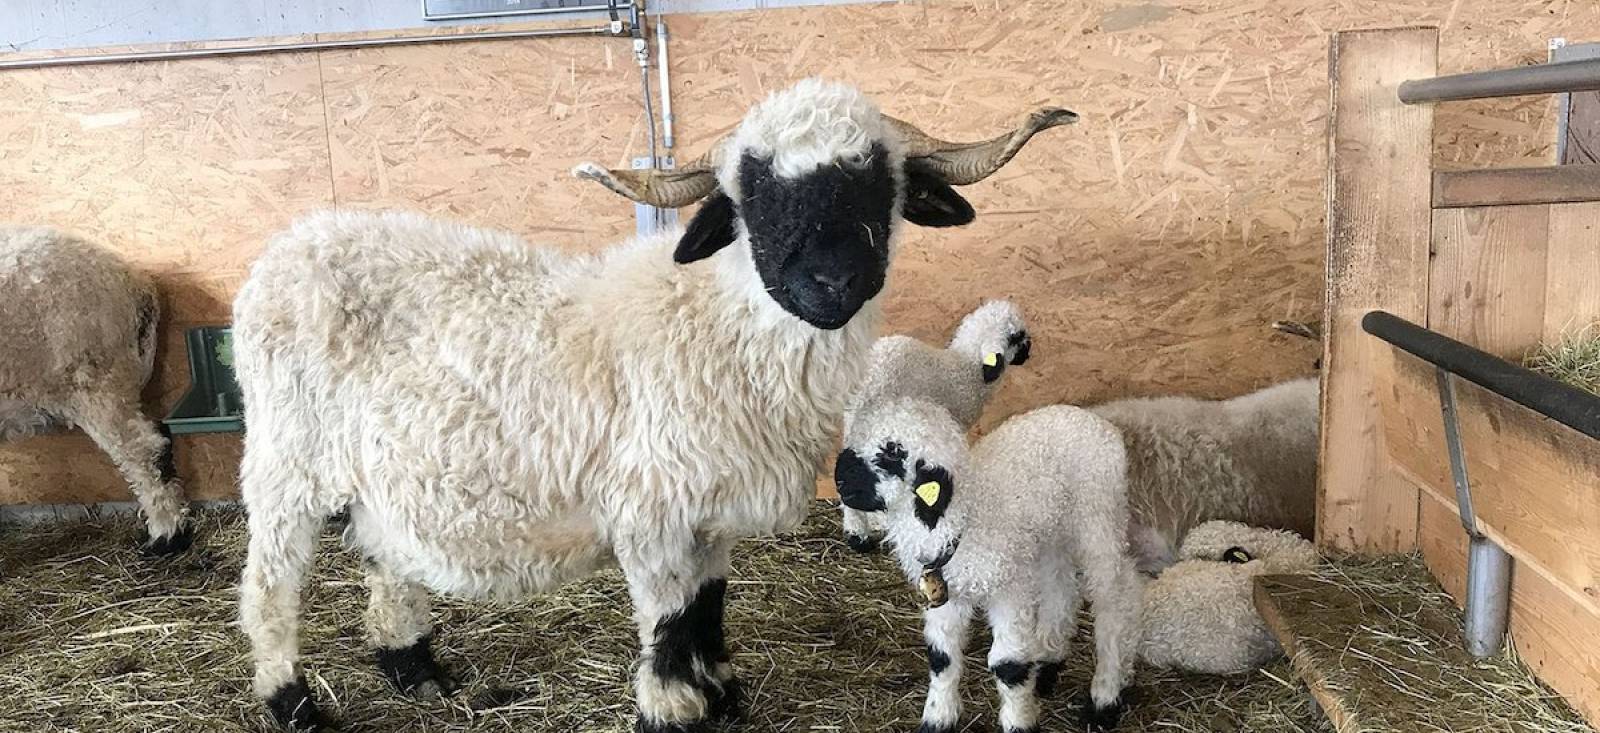 THE BEST LOOKING BLACKNOSE SHEEP